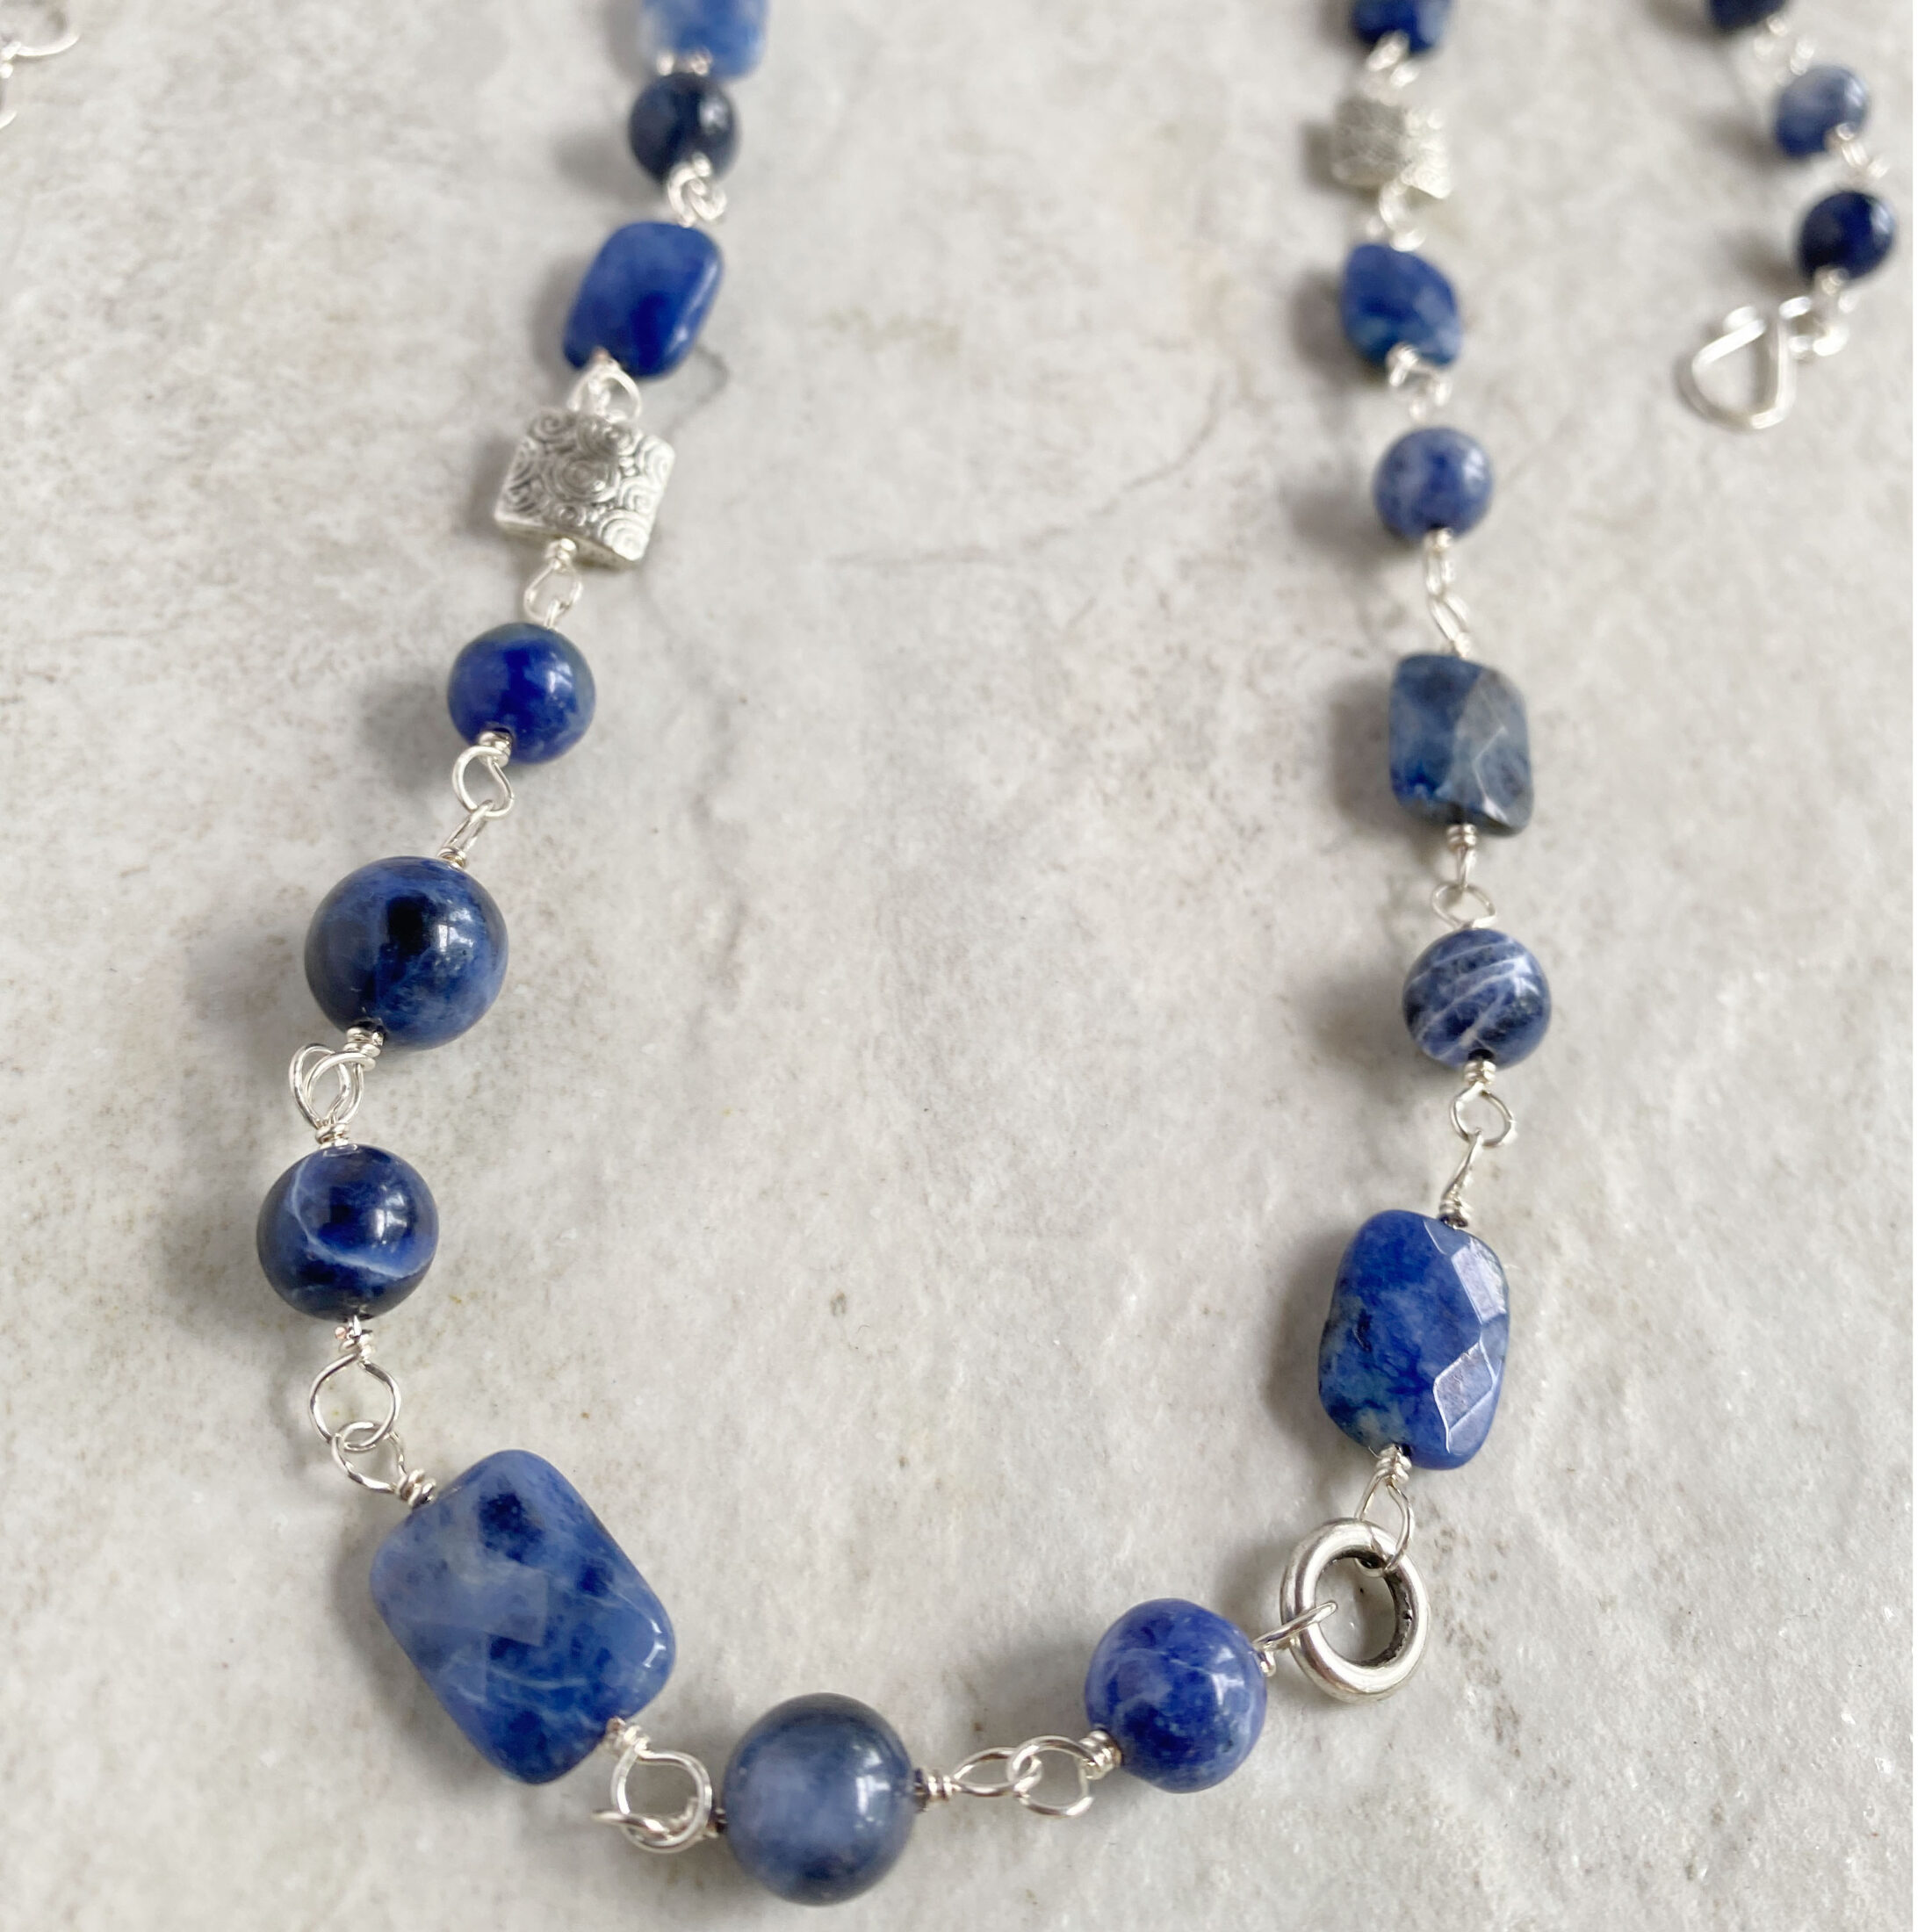 Blue beads choker with polki pendant photo | Fancy jewelry necklace, Blue  sapphire jewelry, Pearl necklace designs